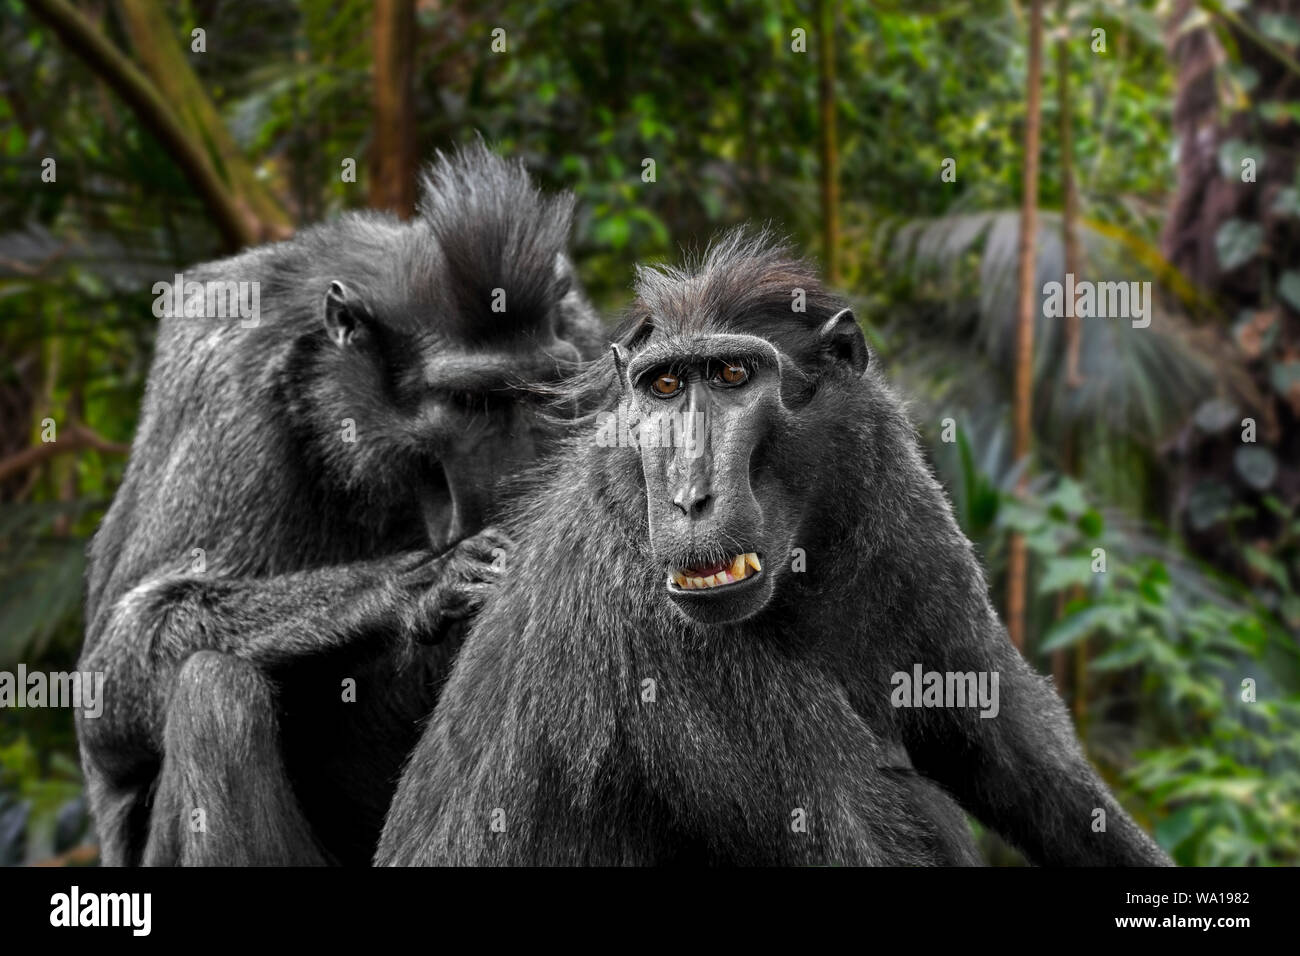 Celebes crested macaque / crested black macaque / (Macaca nigra) grooming and delousing group member, native to the Indonesian island of Sulawesi Stock Photo